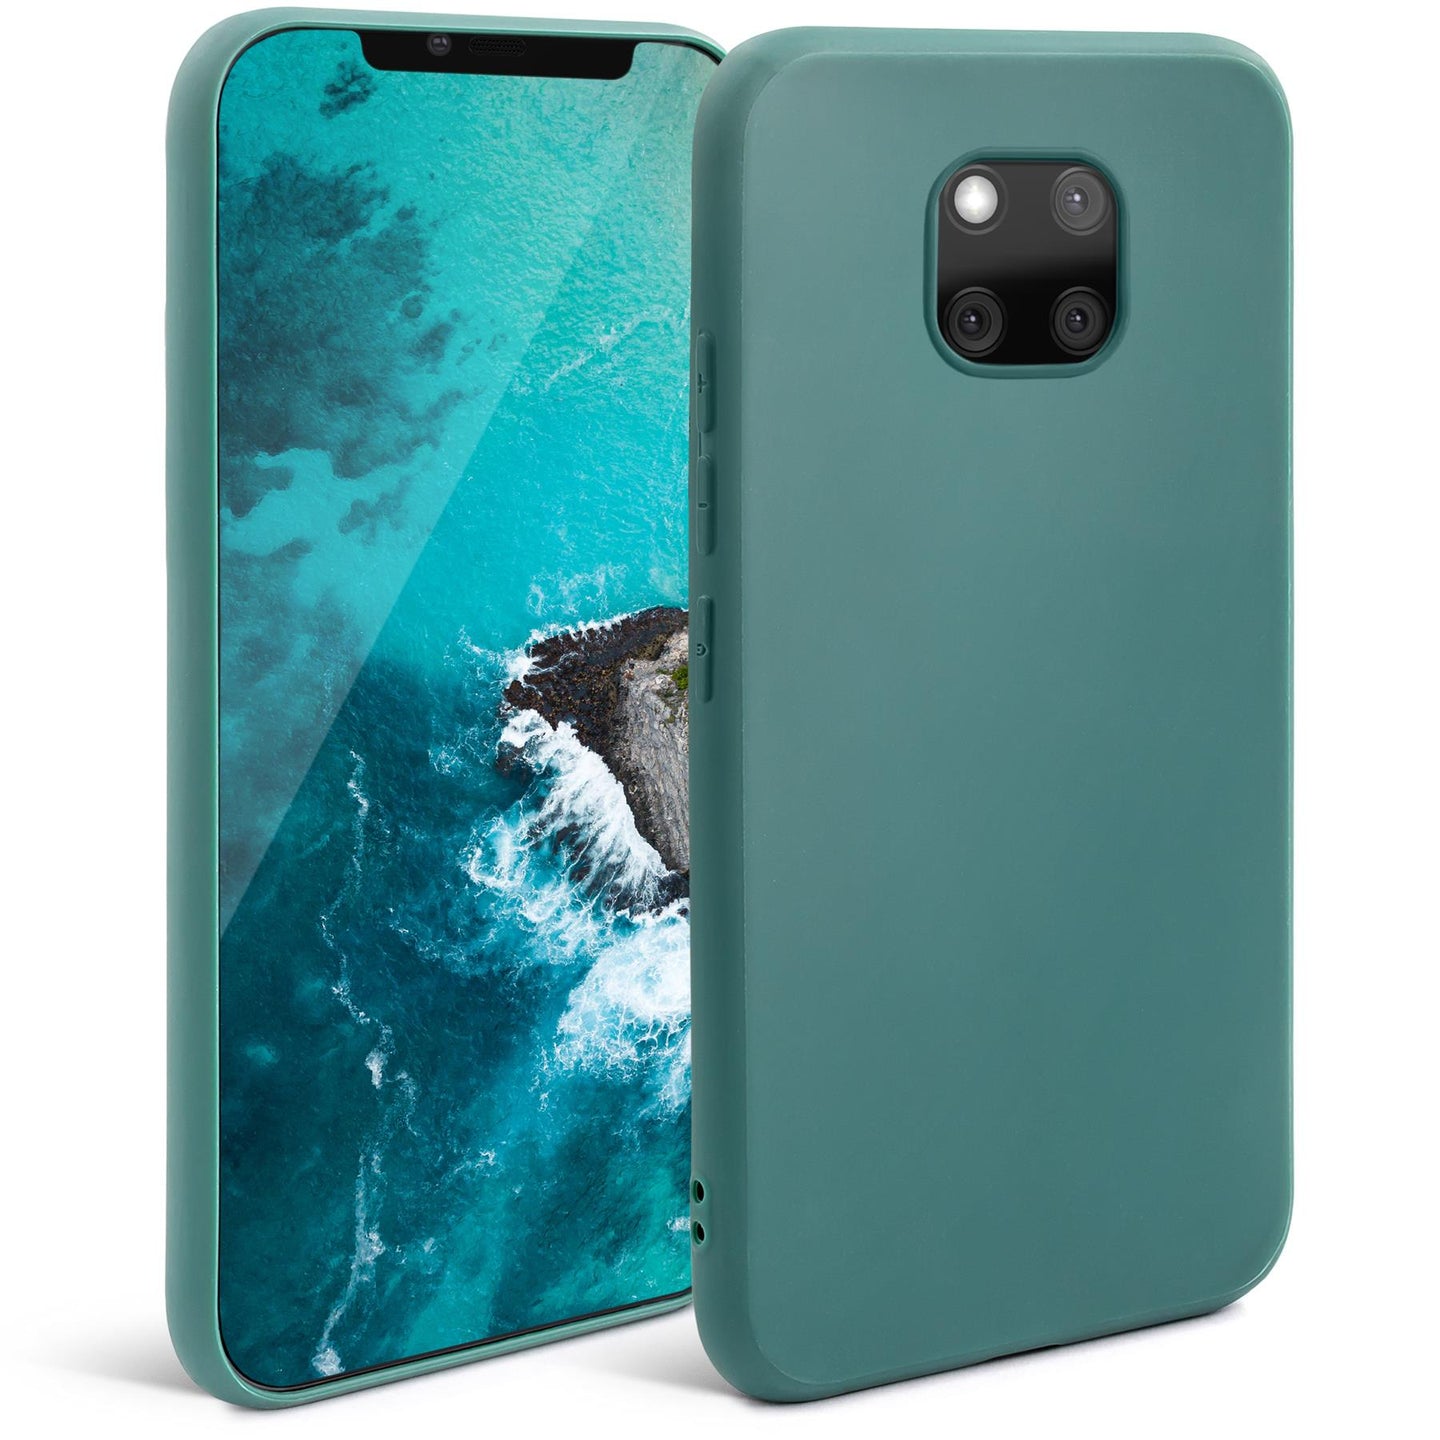 Moozy Minimalist Series Silicone Case for Huawei Mate 20 Pro, Blue Grey - Matte Finish Lightweight Mobile Phone Case Slim Soft Protective TPU Cover with Matte Surface